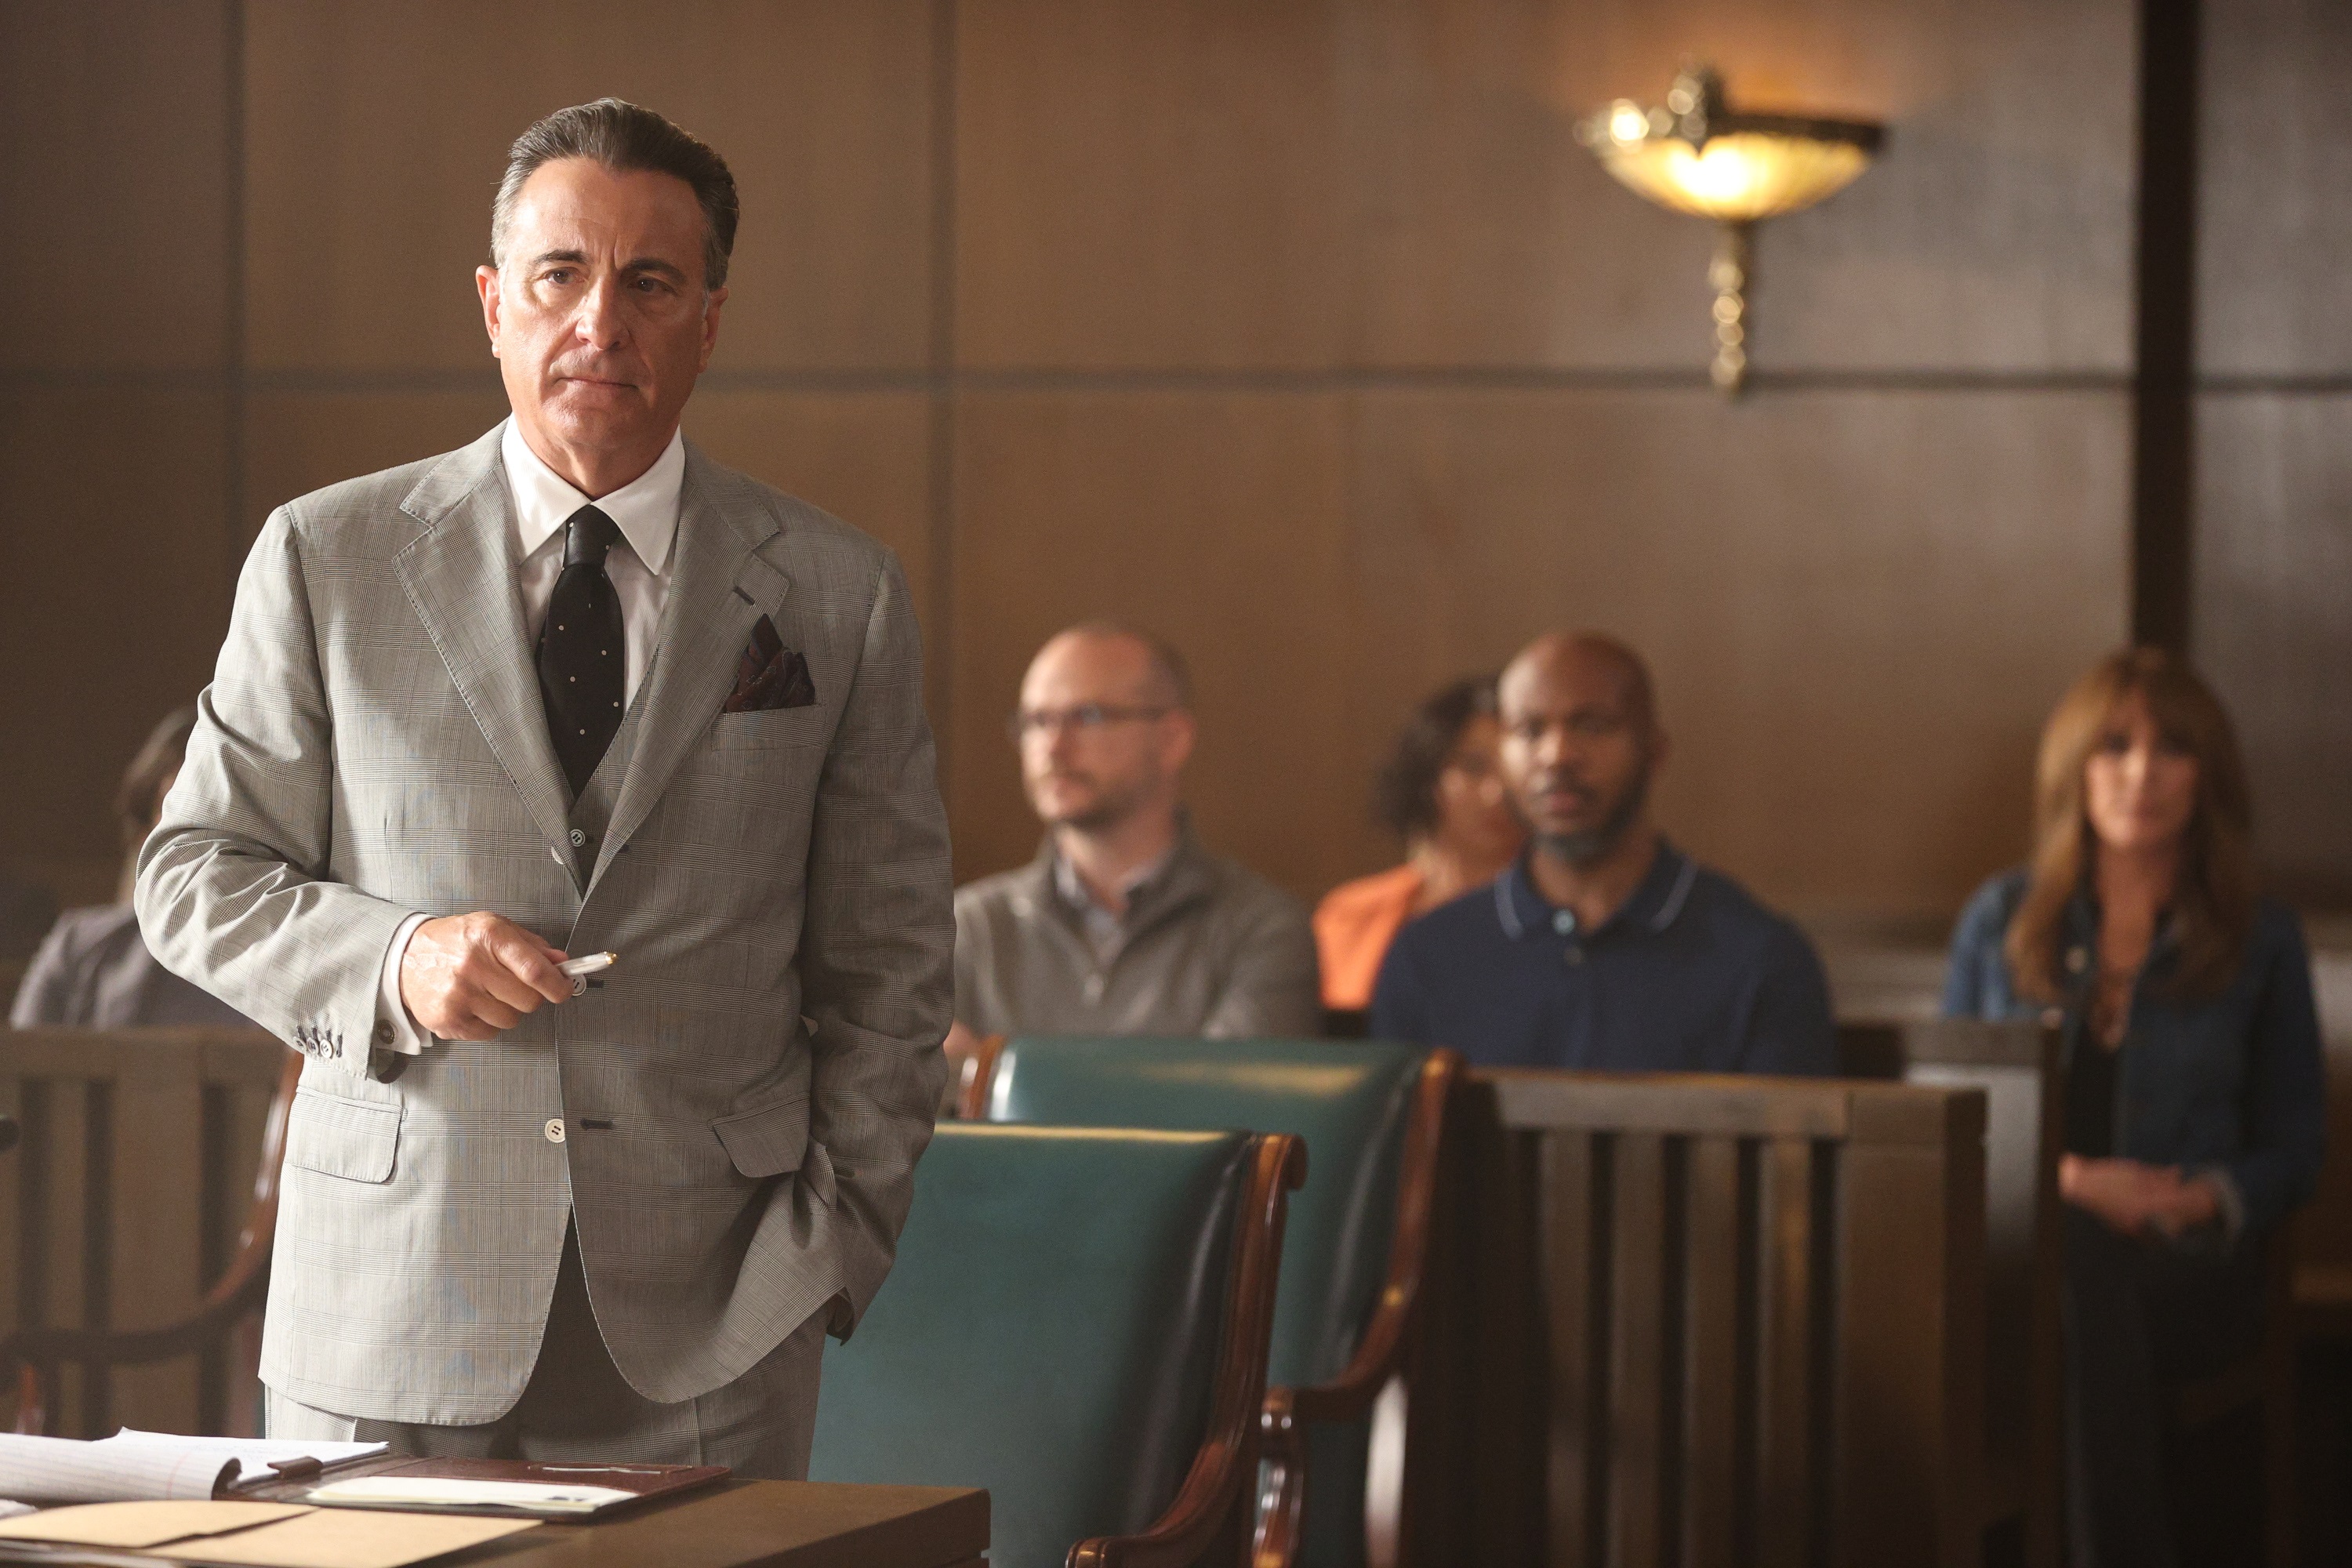 Rebel TV Series Episode 8 with Andy Garcia in the courtroom